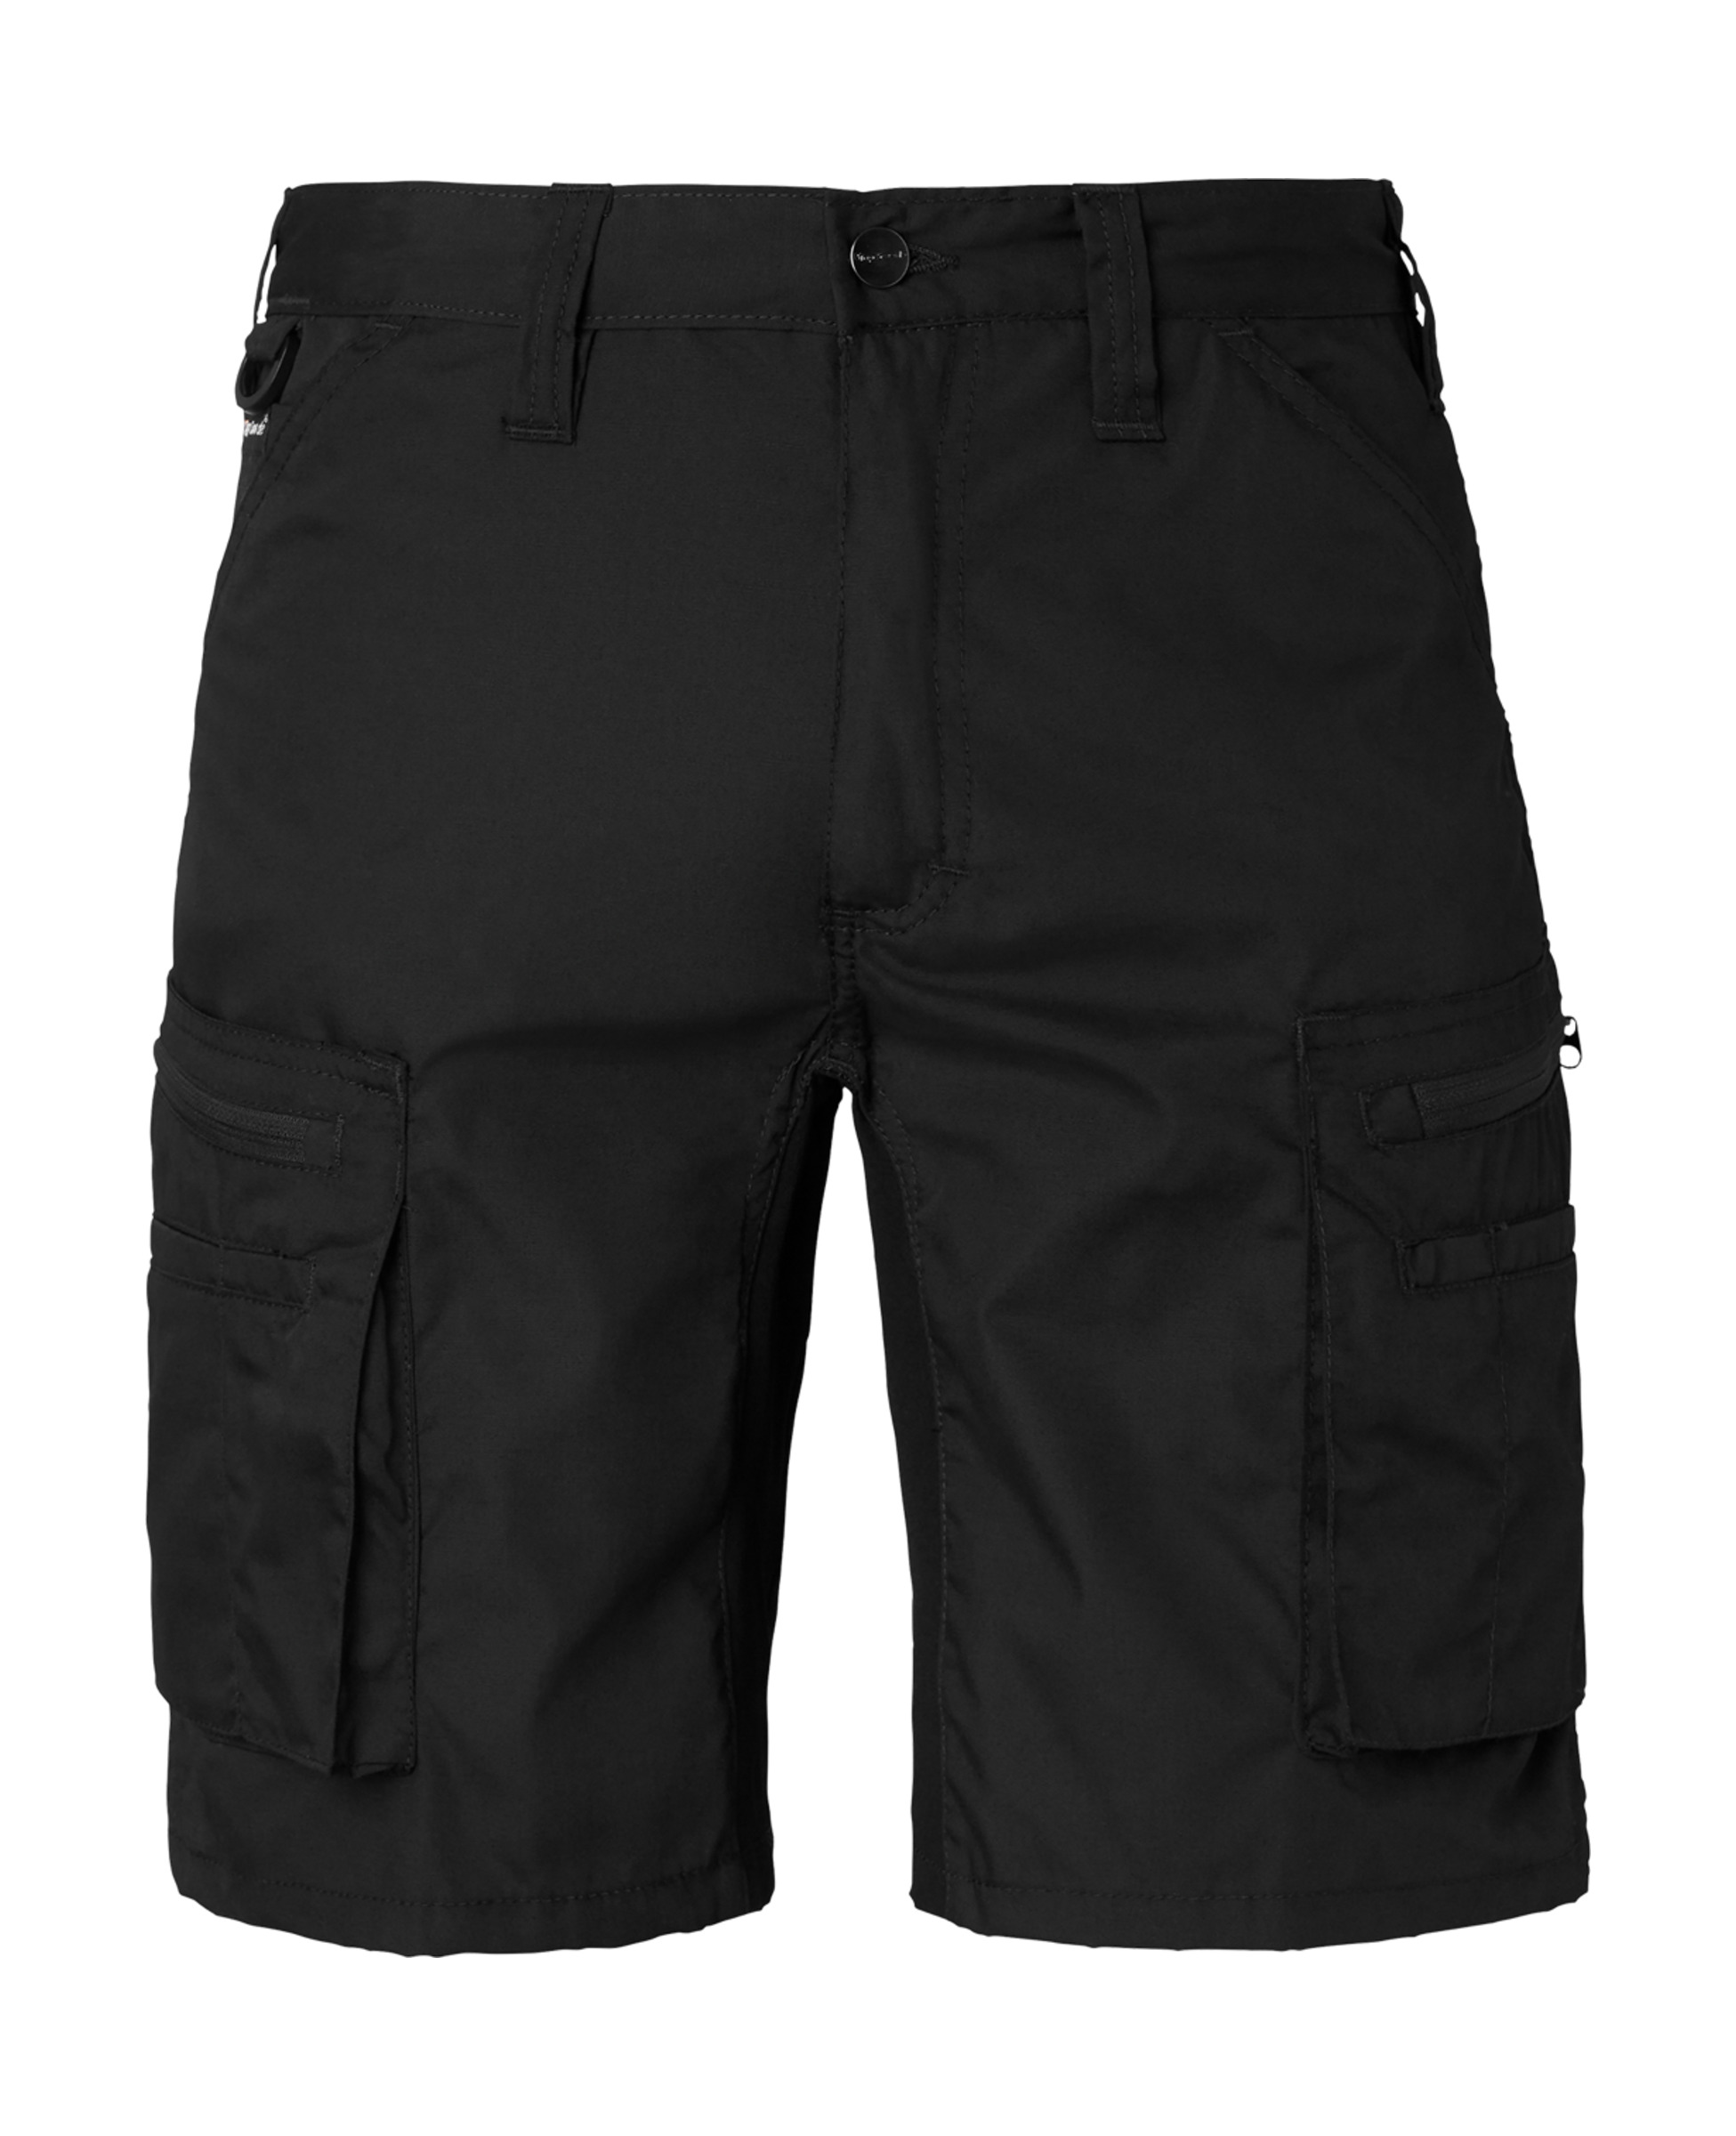 Top Swede 300 Shorts